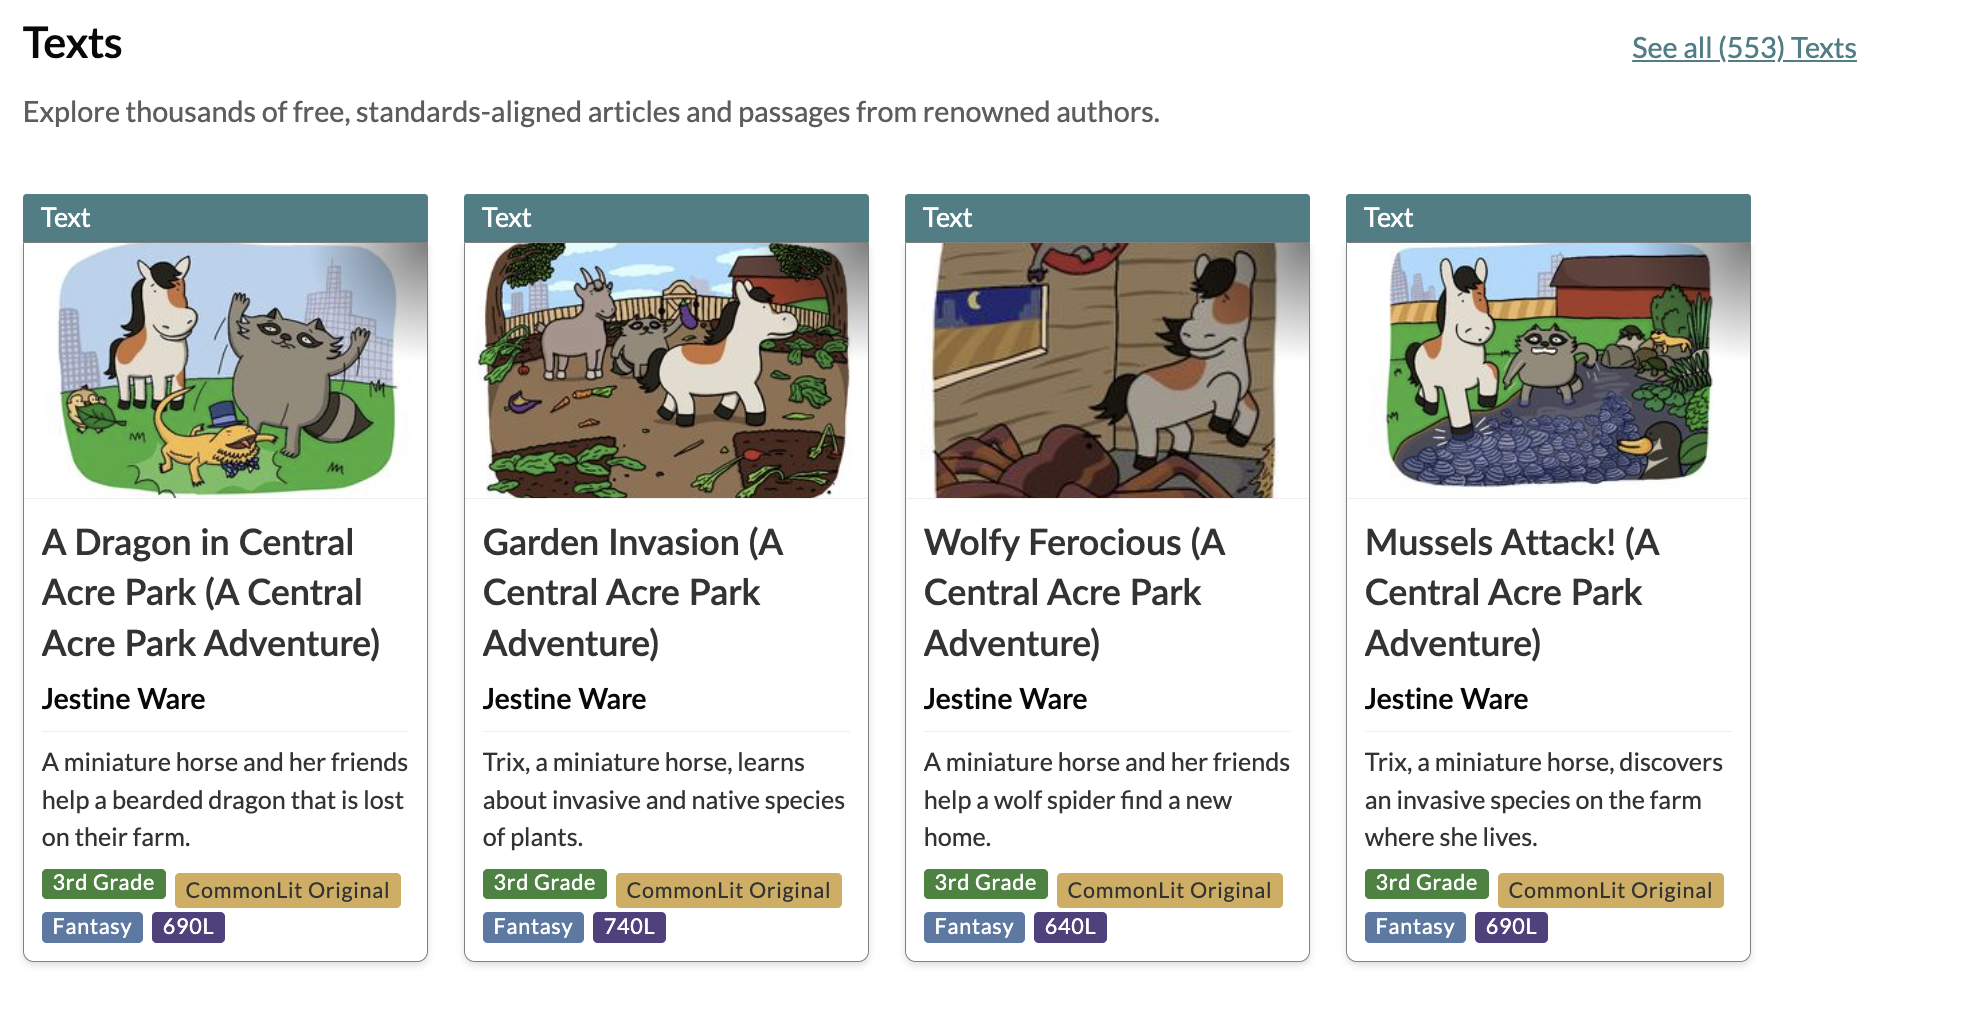 Screenshot of the Central Acre Park Adventure Series in the CommonLit Library